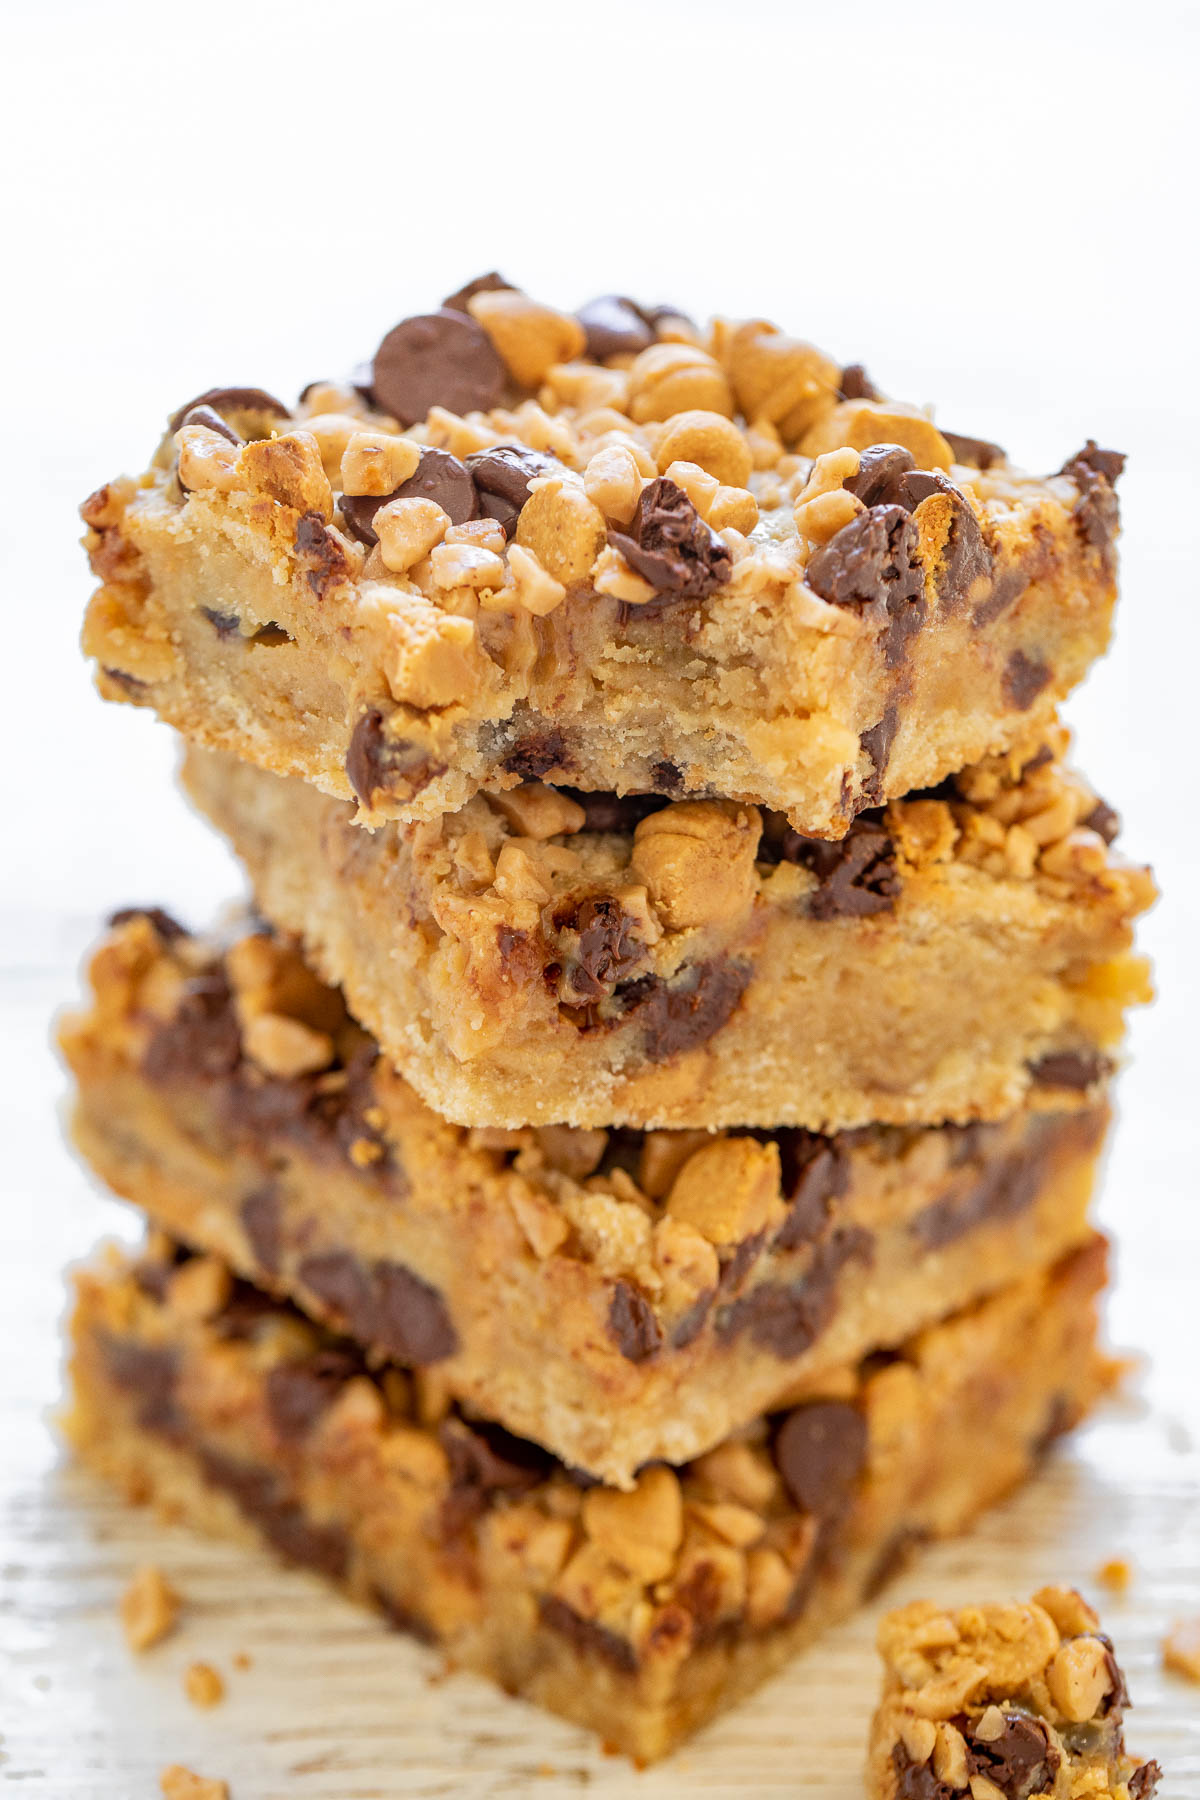 Peanut Butter Chocolate Chip Toffee Bars - Thick, rich, decadent cookie bars made with chocolate chips, peanut butter chips, creamy sweetened condensed milk, and crunchy toffee bits! A FAST and EASY no mixer, one bowl recipe that is sure to impress friends and family! The bars also keep fresh for a long time and are a great make-ahead dessert or great for gifting.